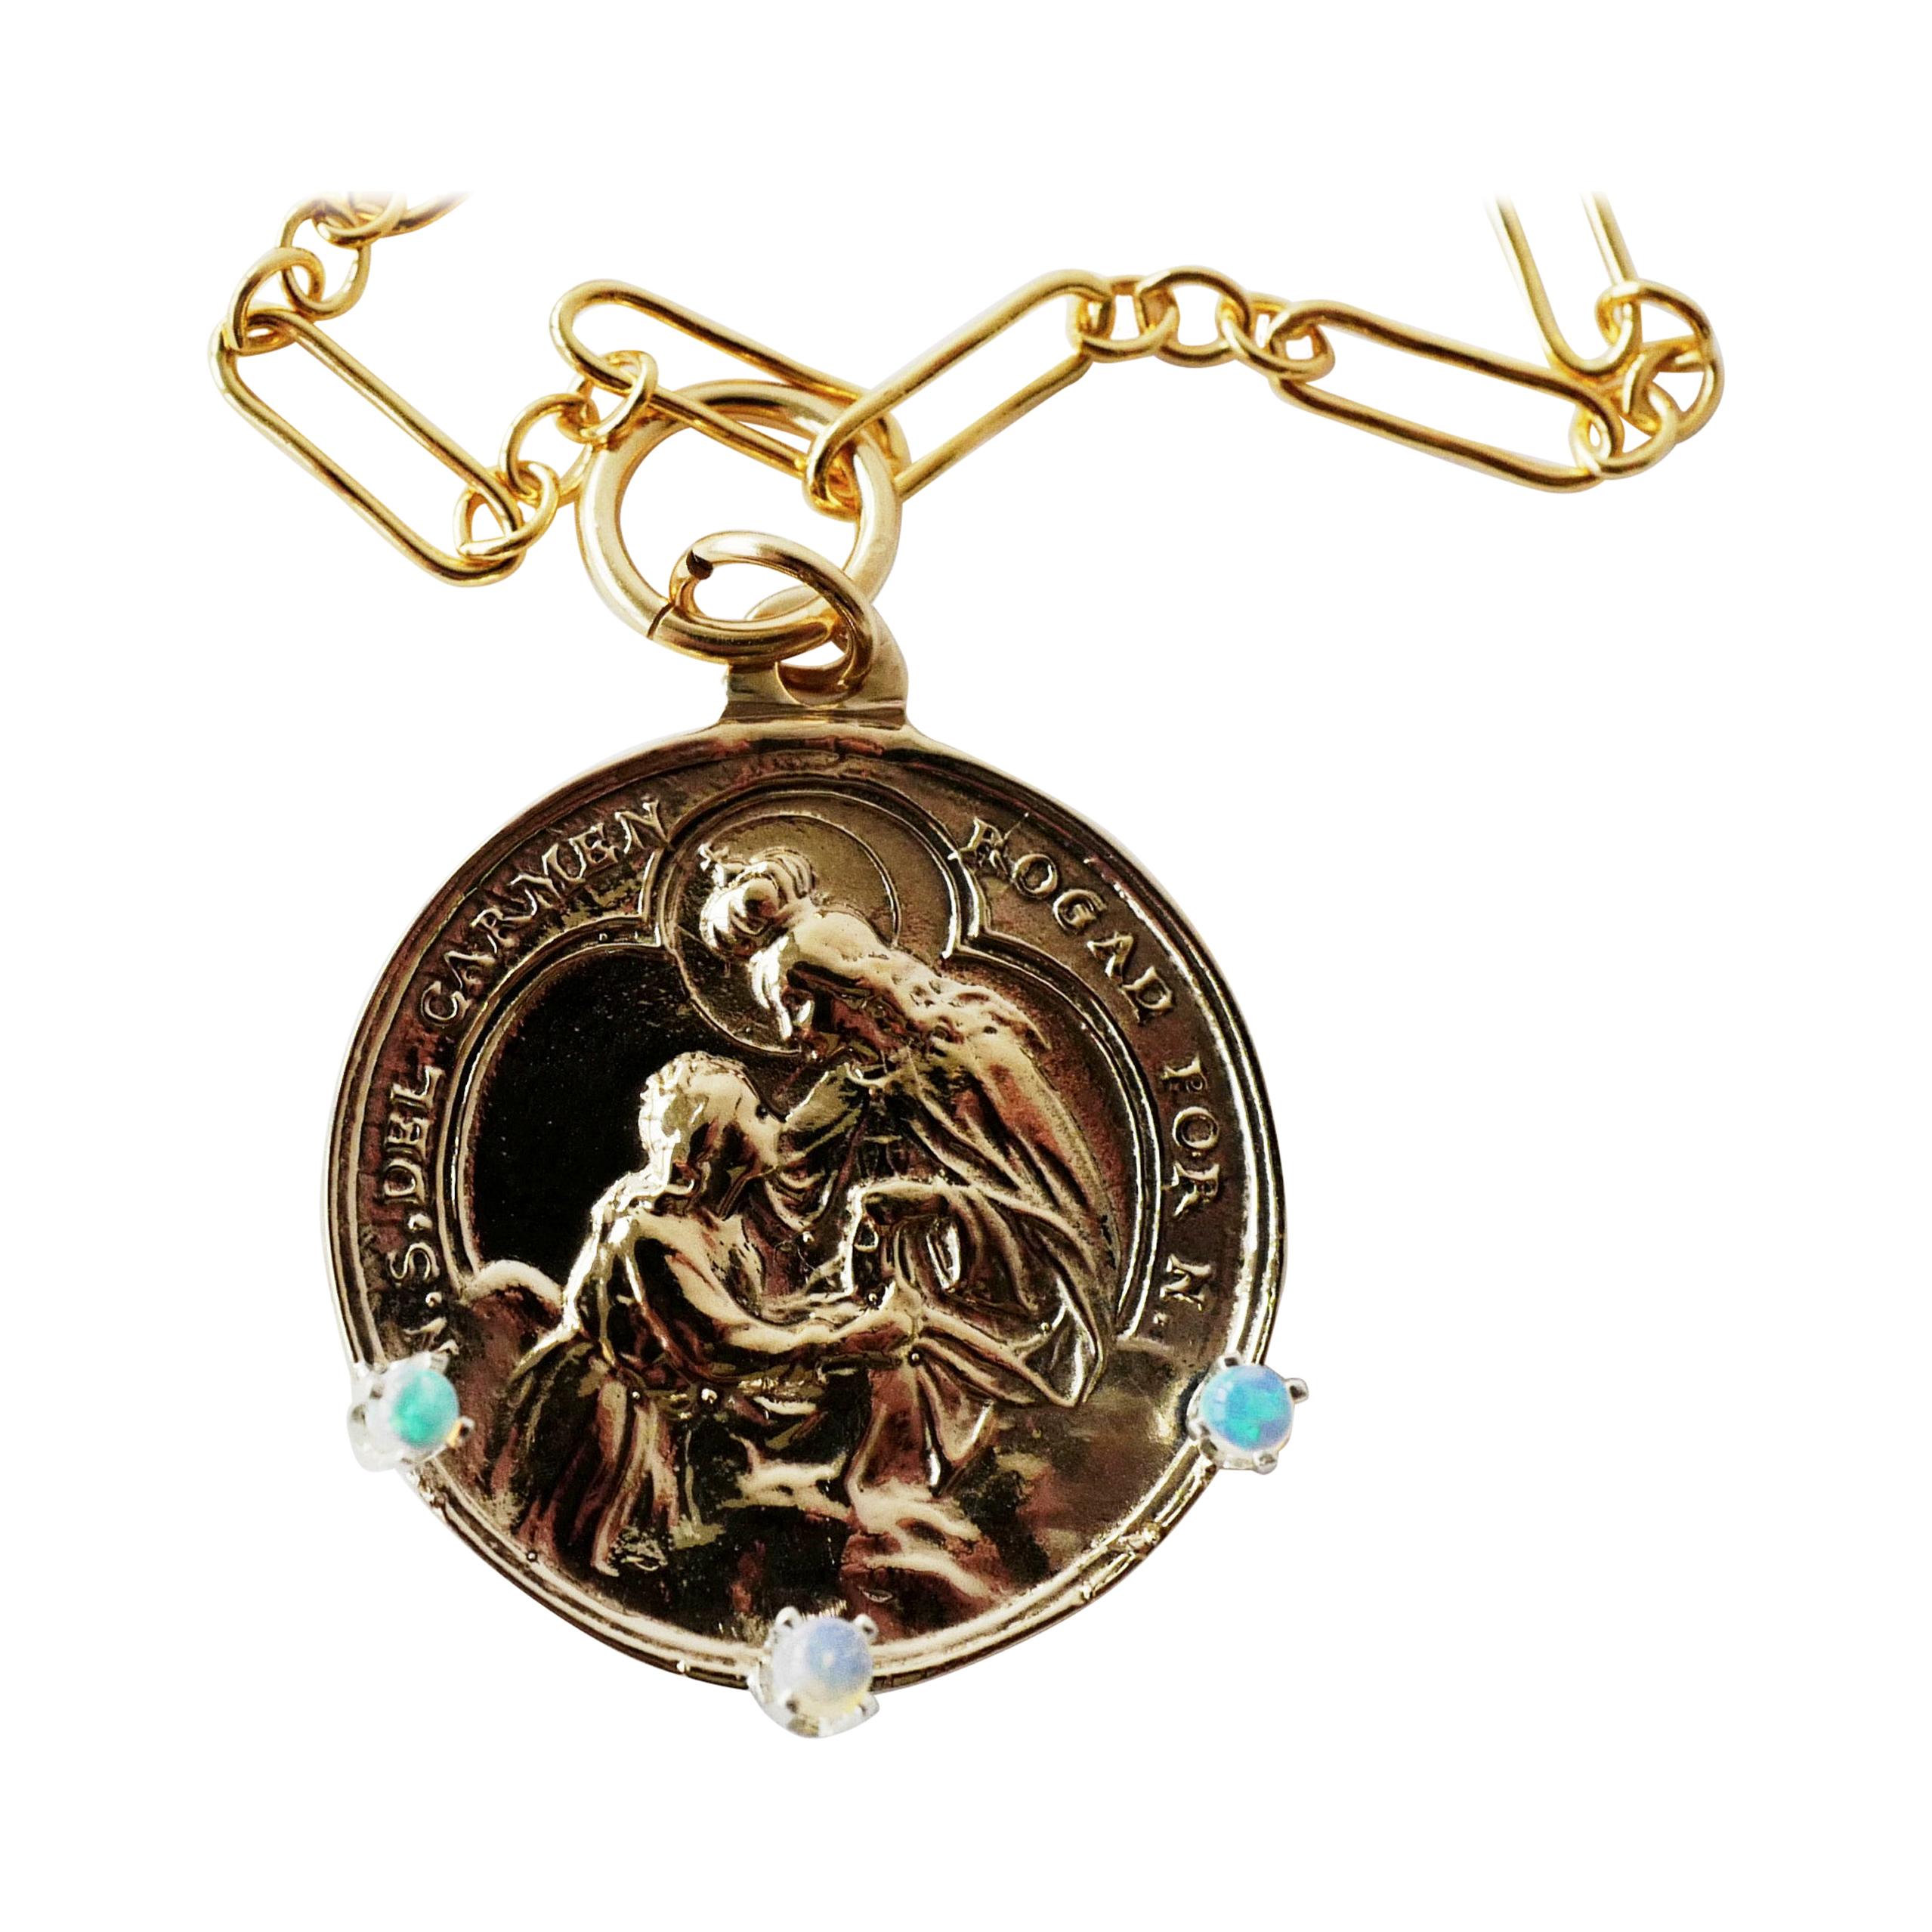 Bronze Medal Necklace on a Gold Filled Chunky Chain Virgin Mary with 3 Opals set around the pendant Coin Pendant J Dauphin

Exclusive piece with Virgin Mary pendant with 3 Opals. The Chain is 28' long but can be made shorter or longer on